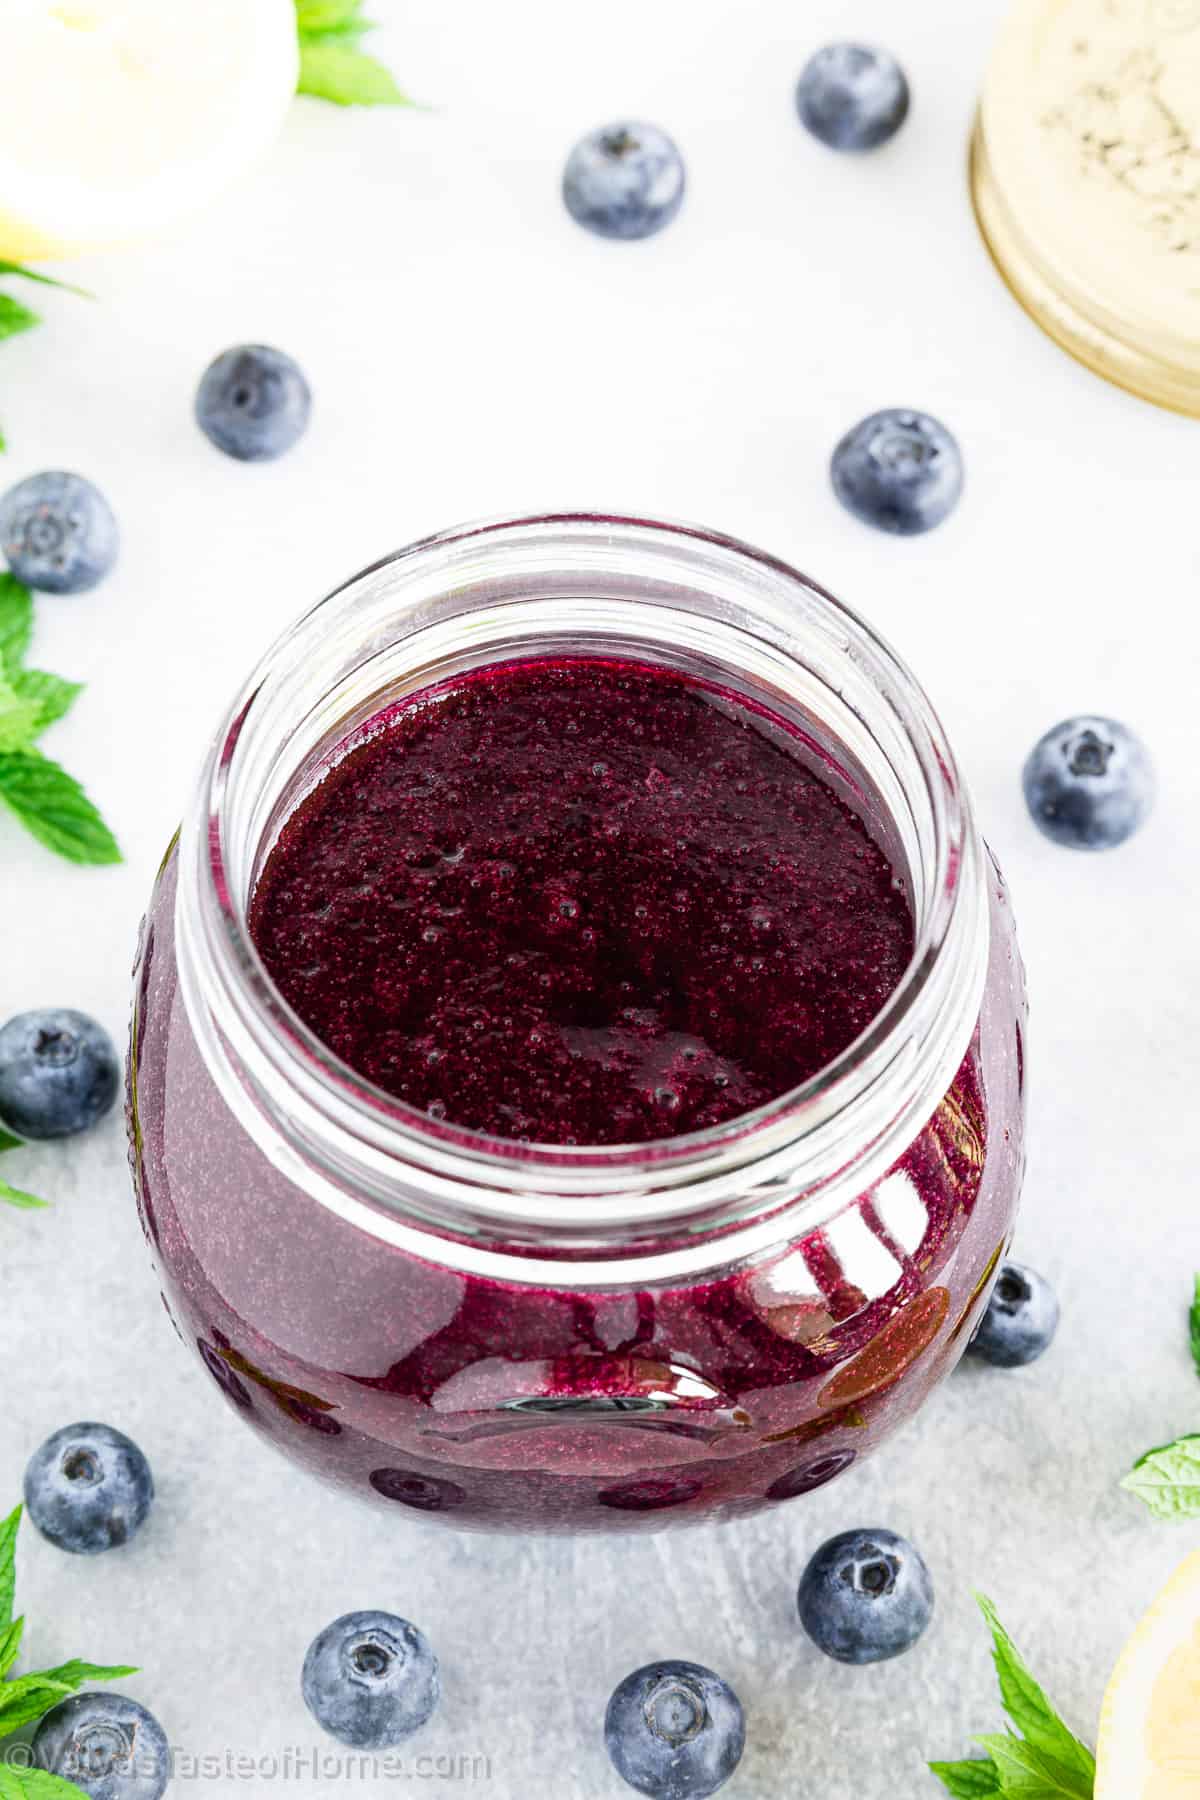 Blueberry coulis is a versatile blueberry sauce prepared from fresh blueberries reduced to a smooth, pourable consistency through cooking and blending.